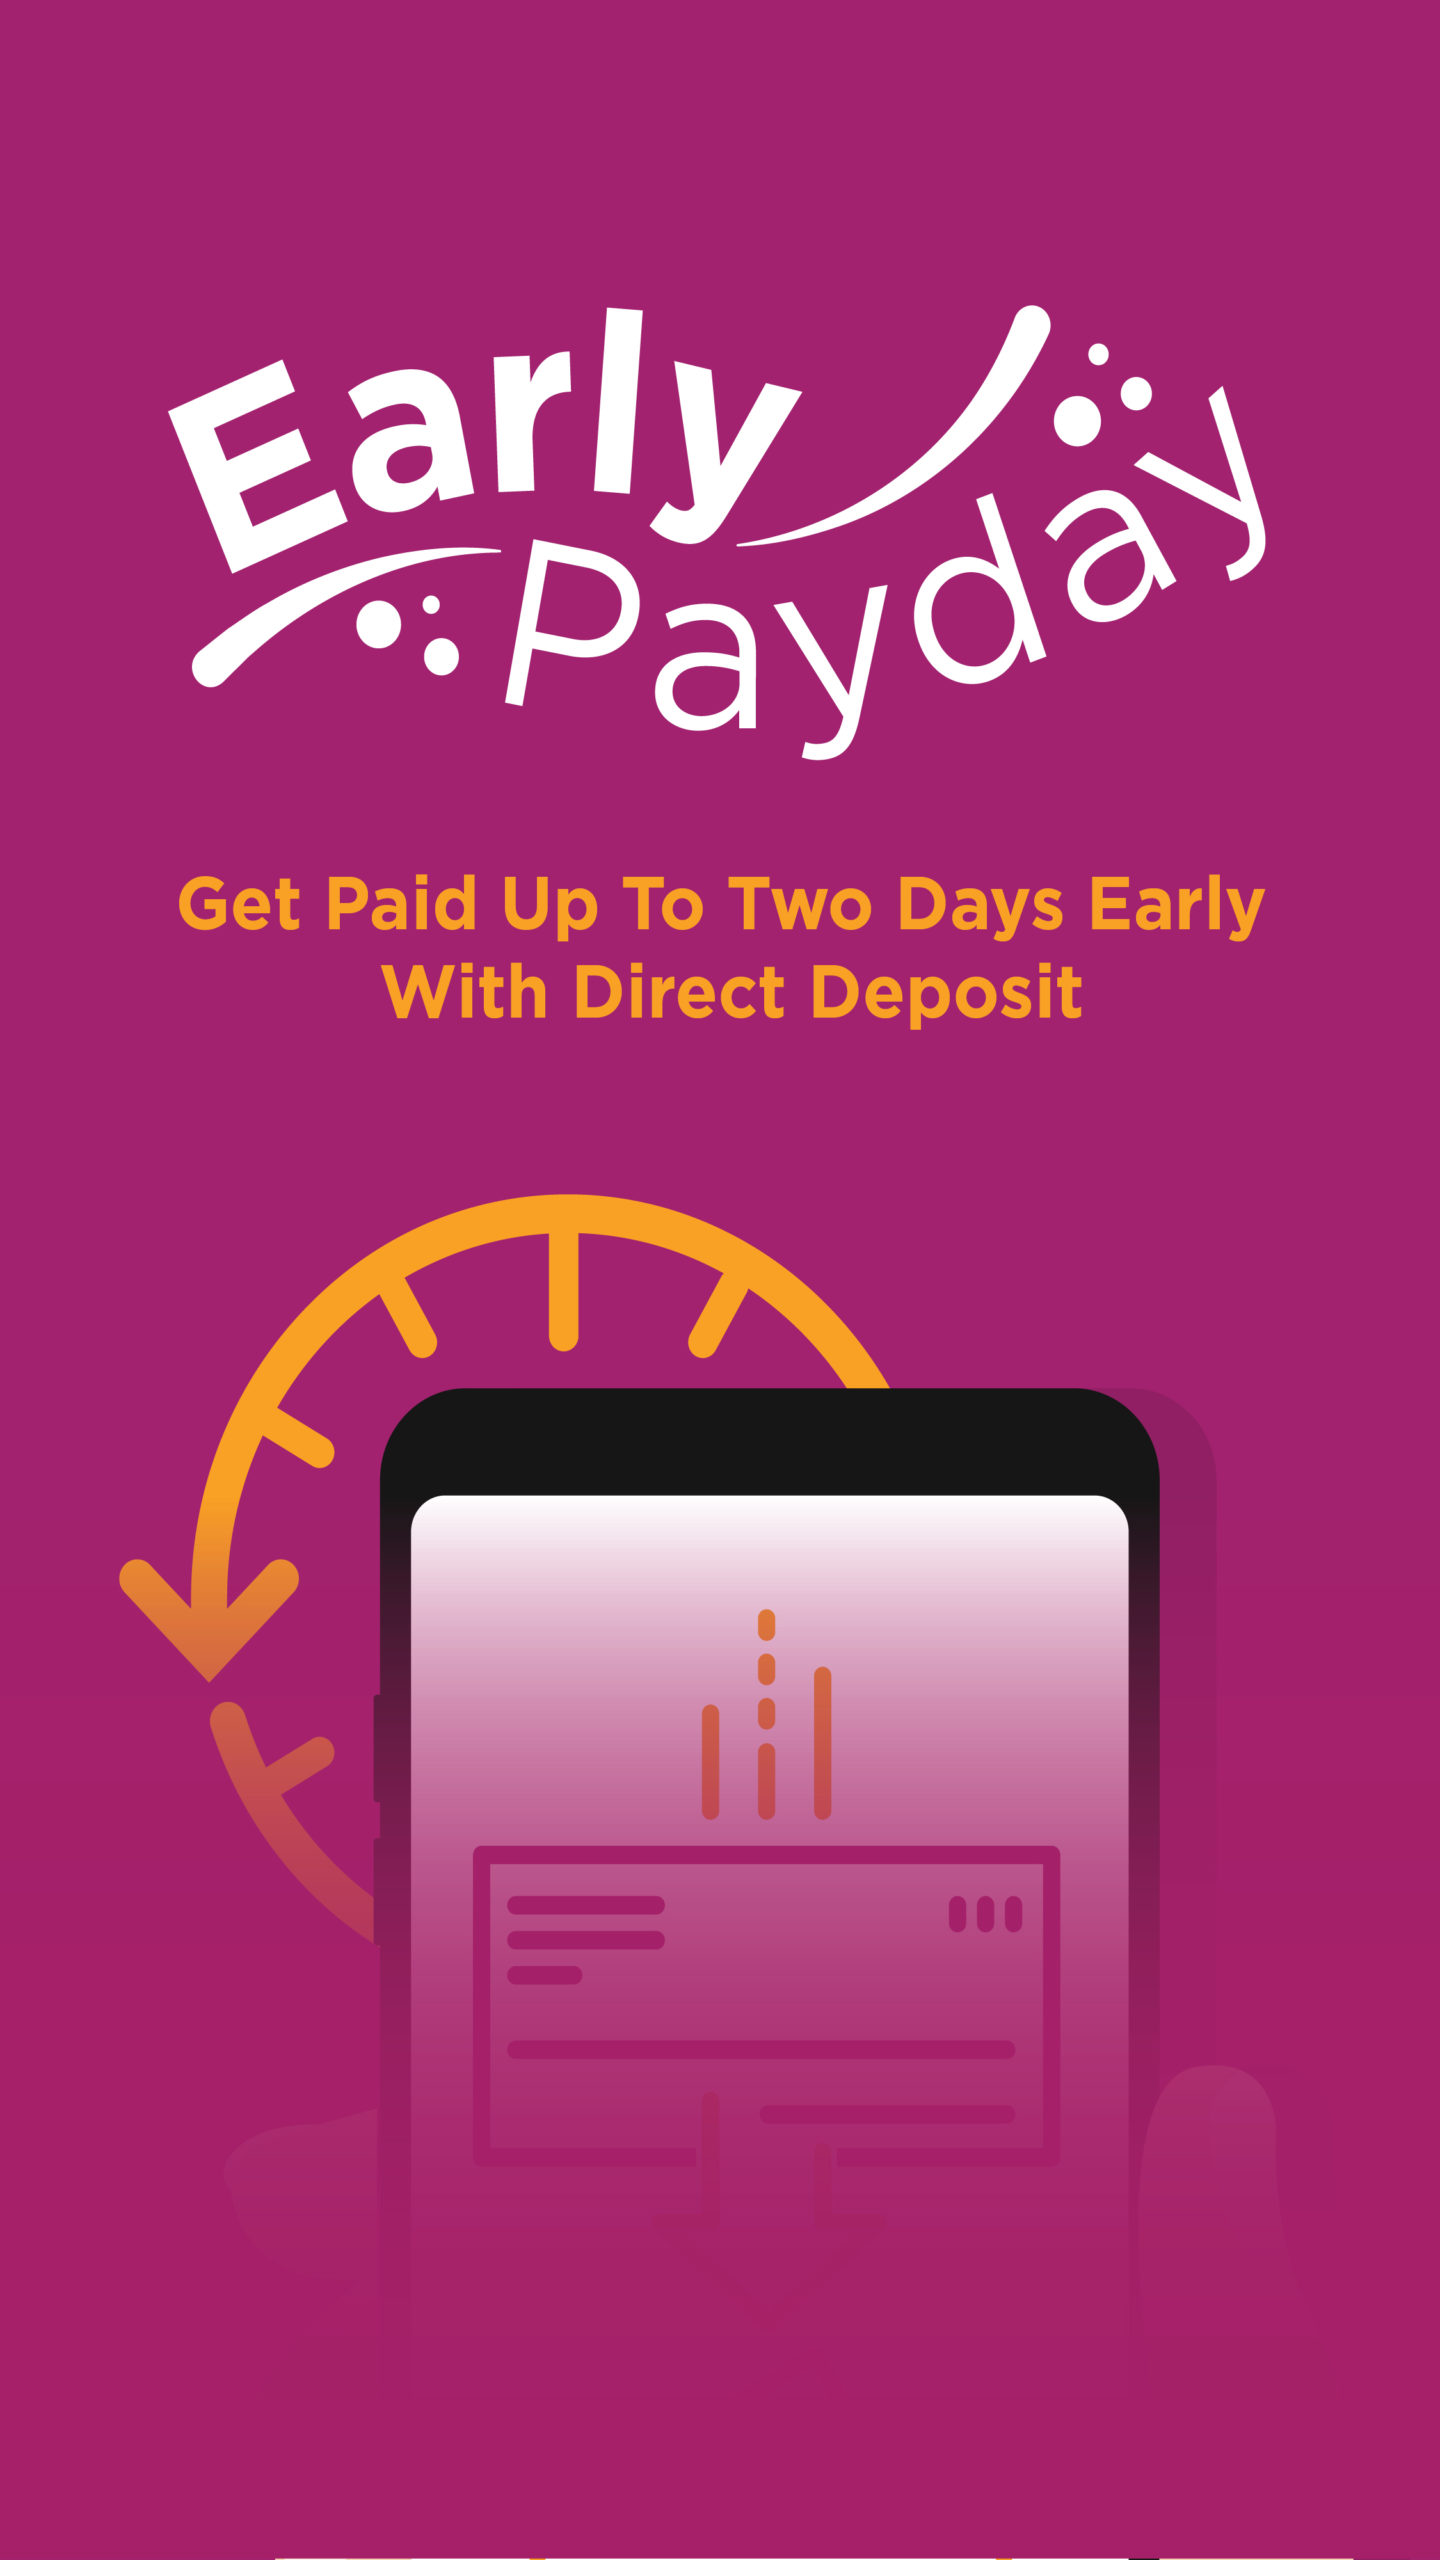 Early Payday; Get paid up to two days early with direct deposit